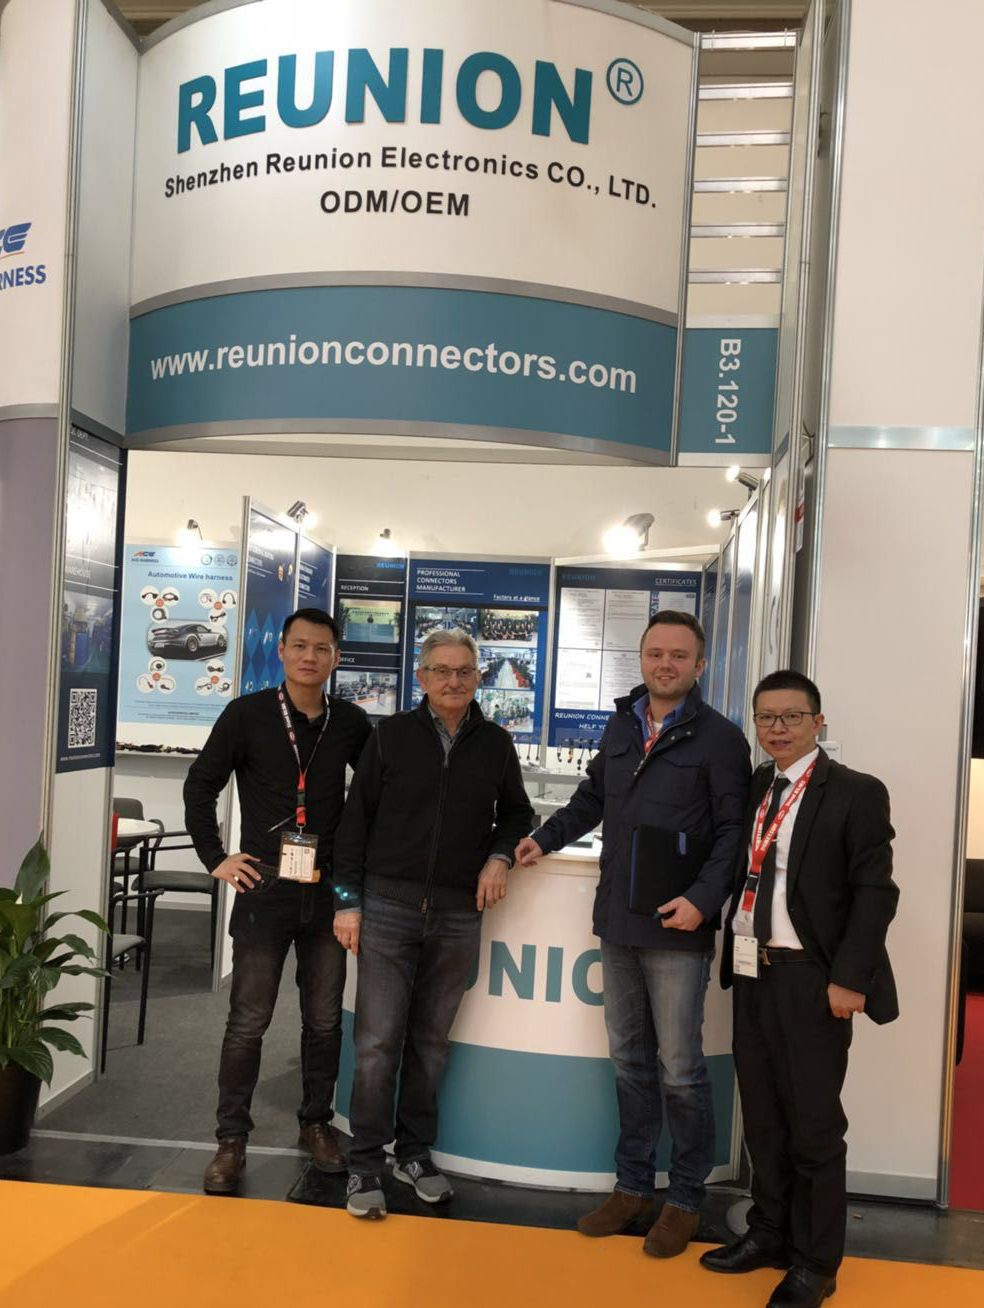 REUNION Connectors will attend Electronica 2018,Munich,Germany